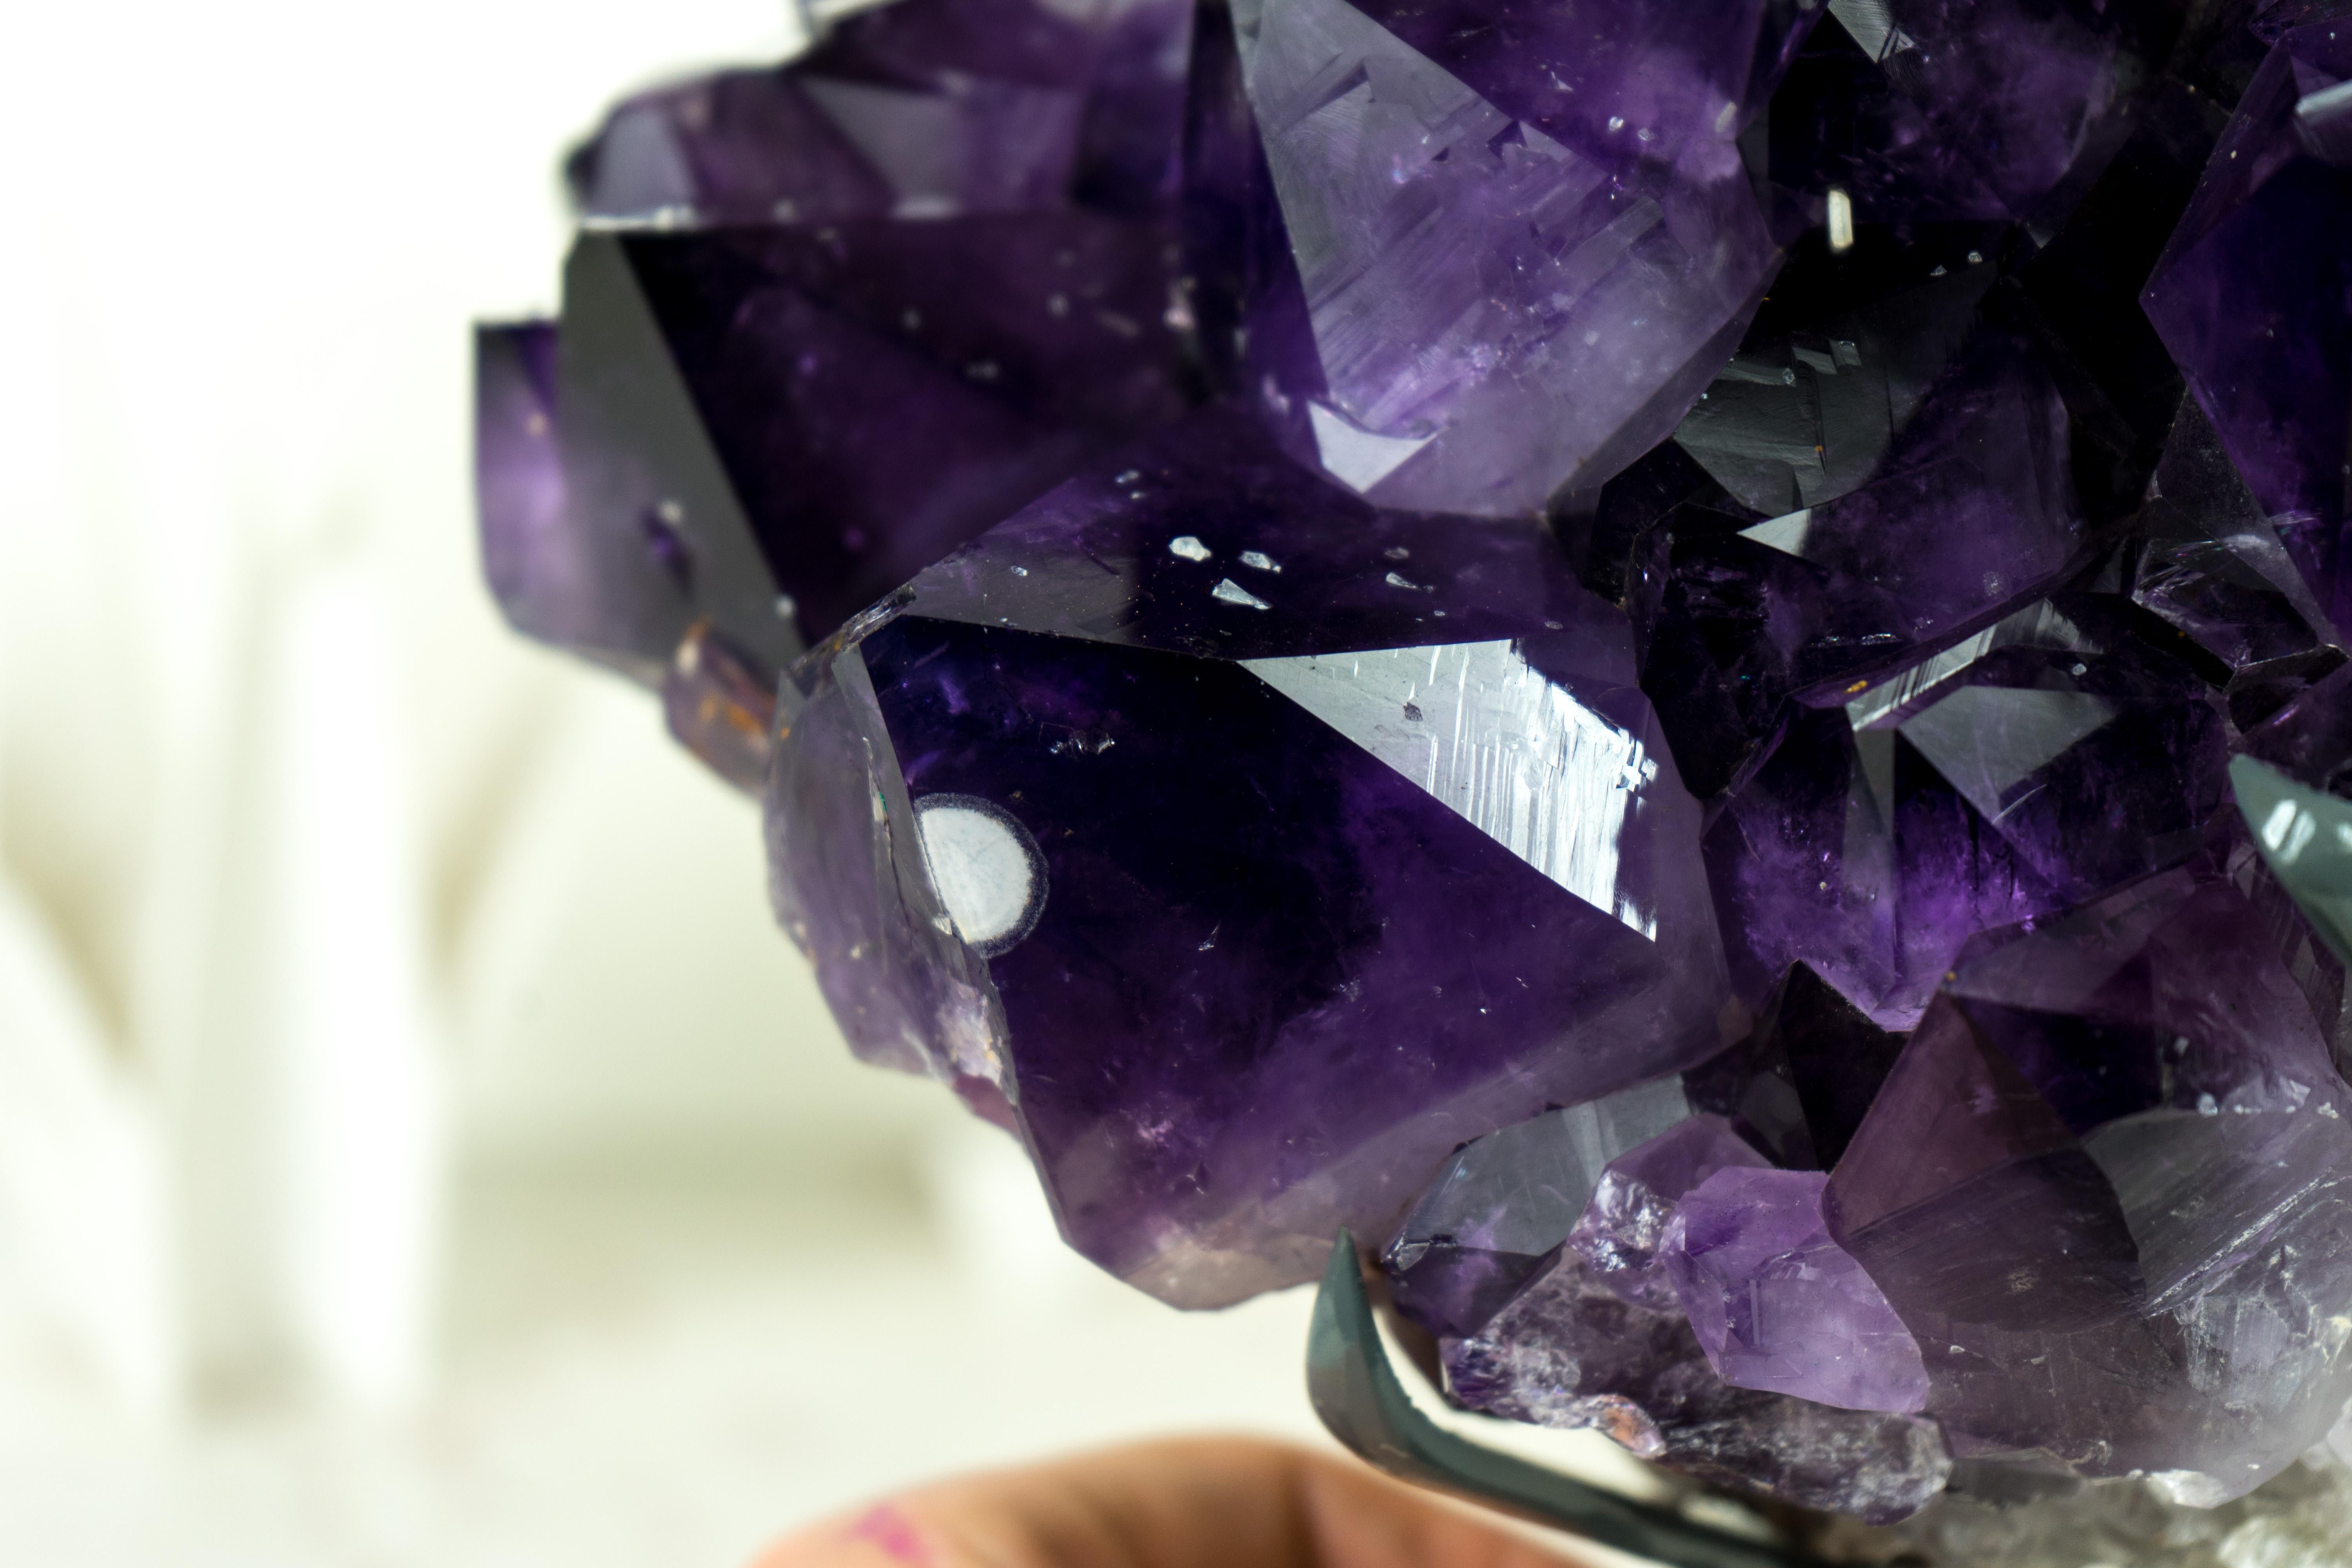 Contemporary AAA Amethyst Cluster with Intense Dark Purple Amethyst Druzy, Decor Crystal For Sale